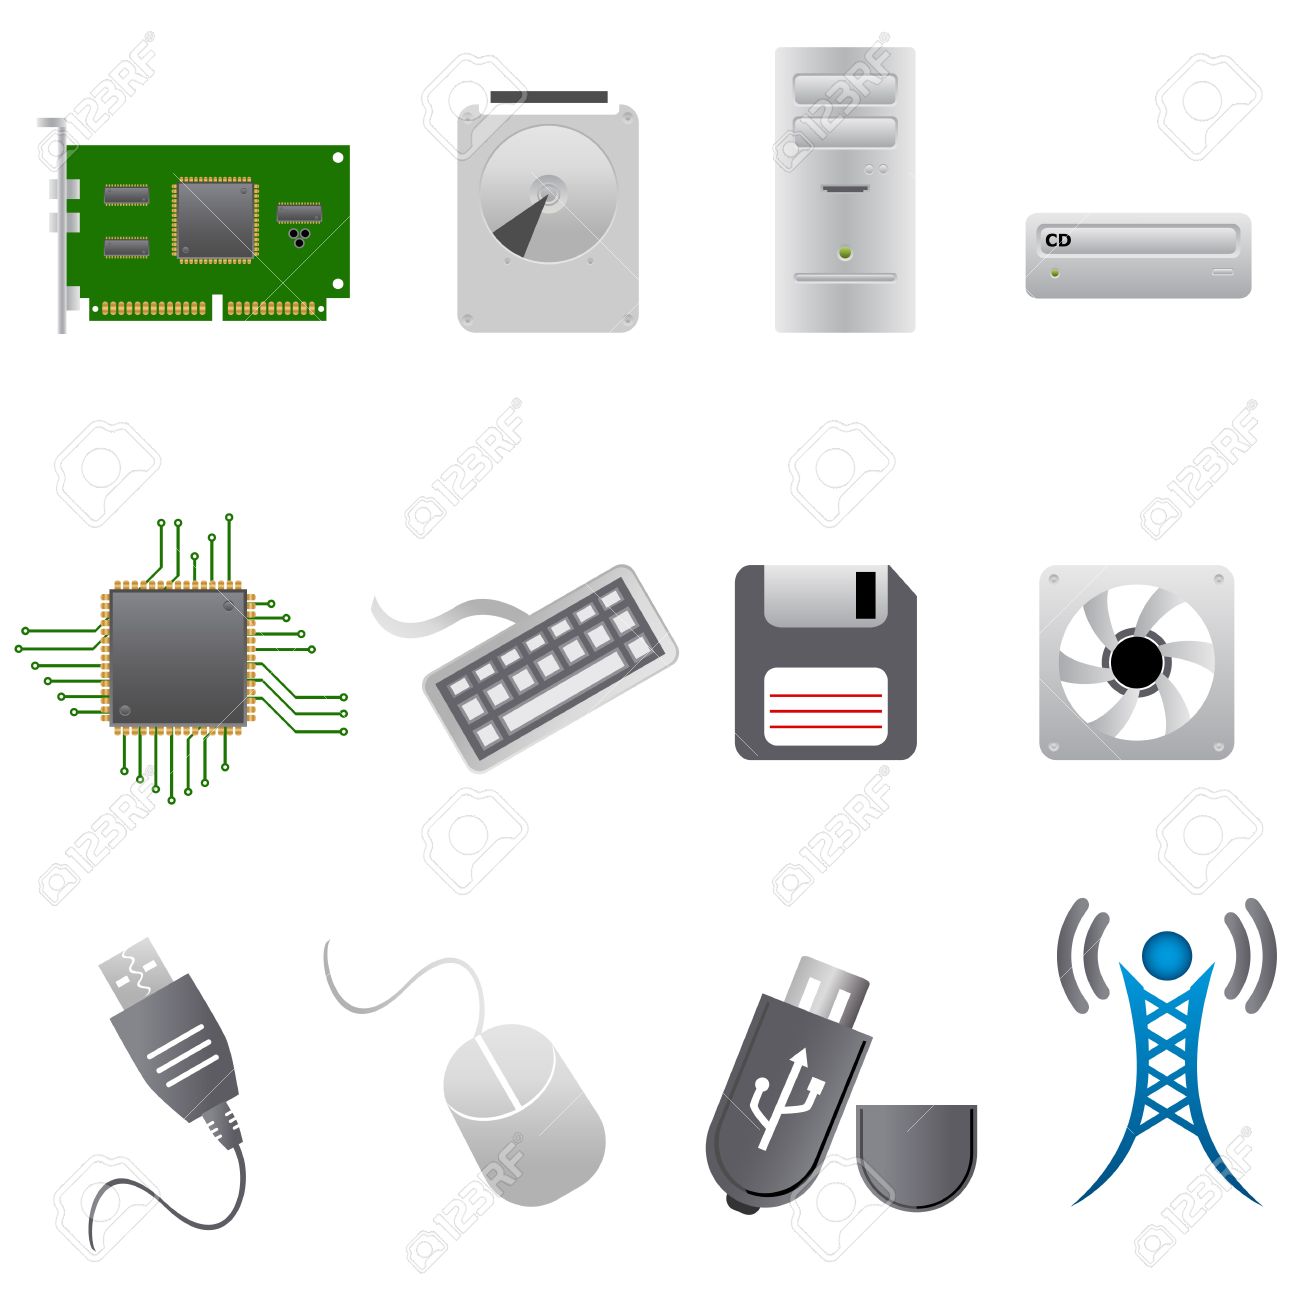 computer devices clipart - photo #5